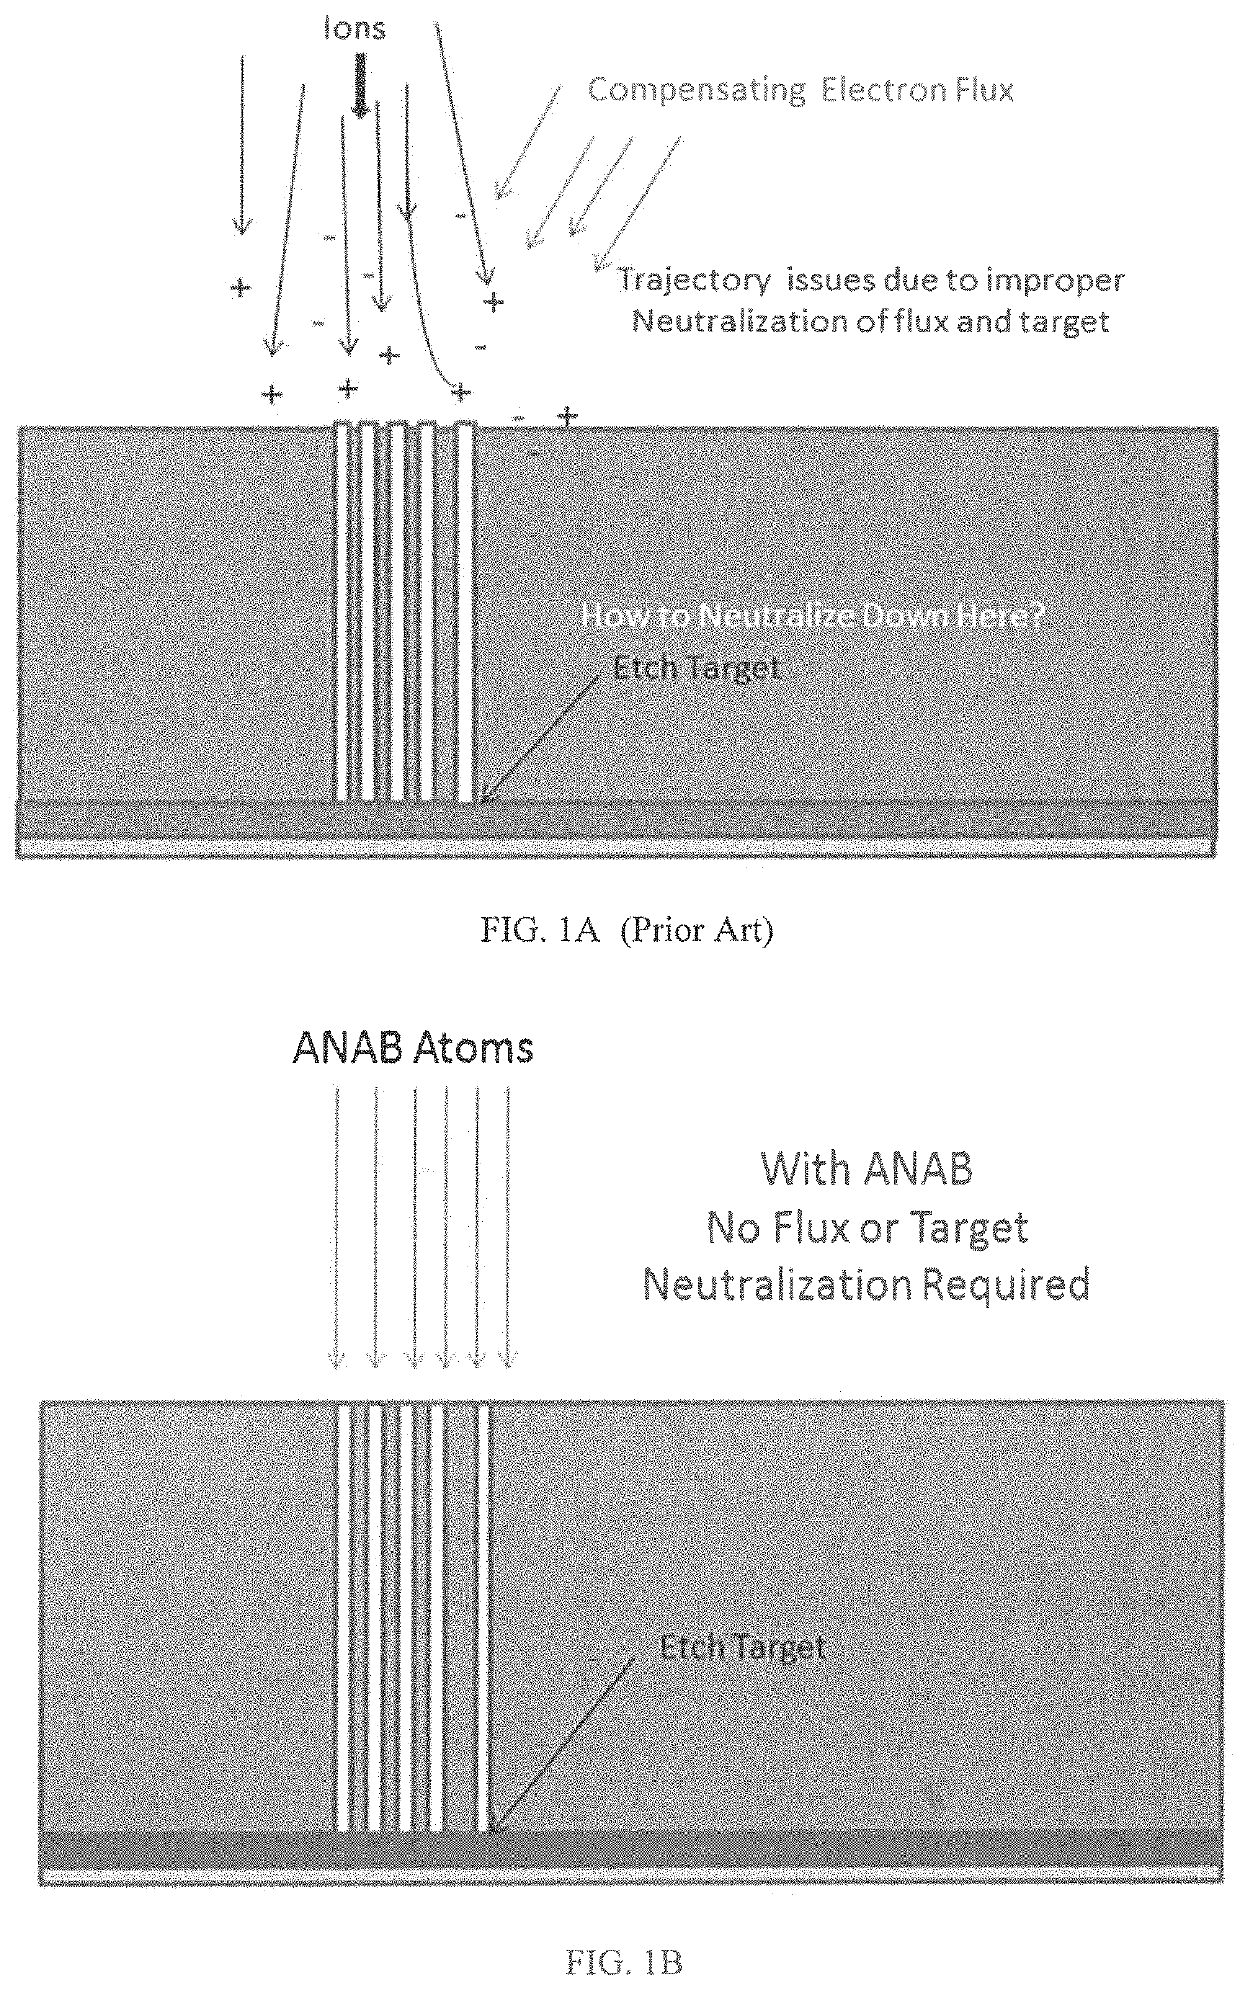 Enhanced high aspect ratio etch performance using accelerated neutral beams derived from gas-cluster ion beams